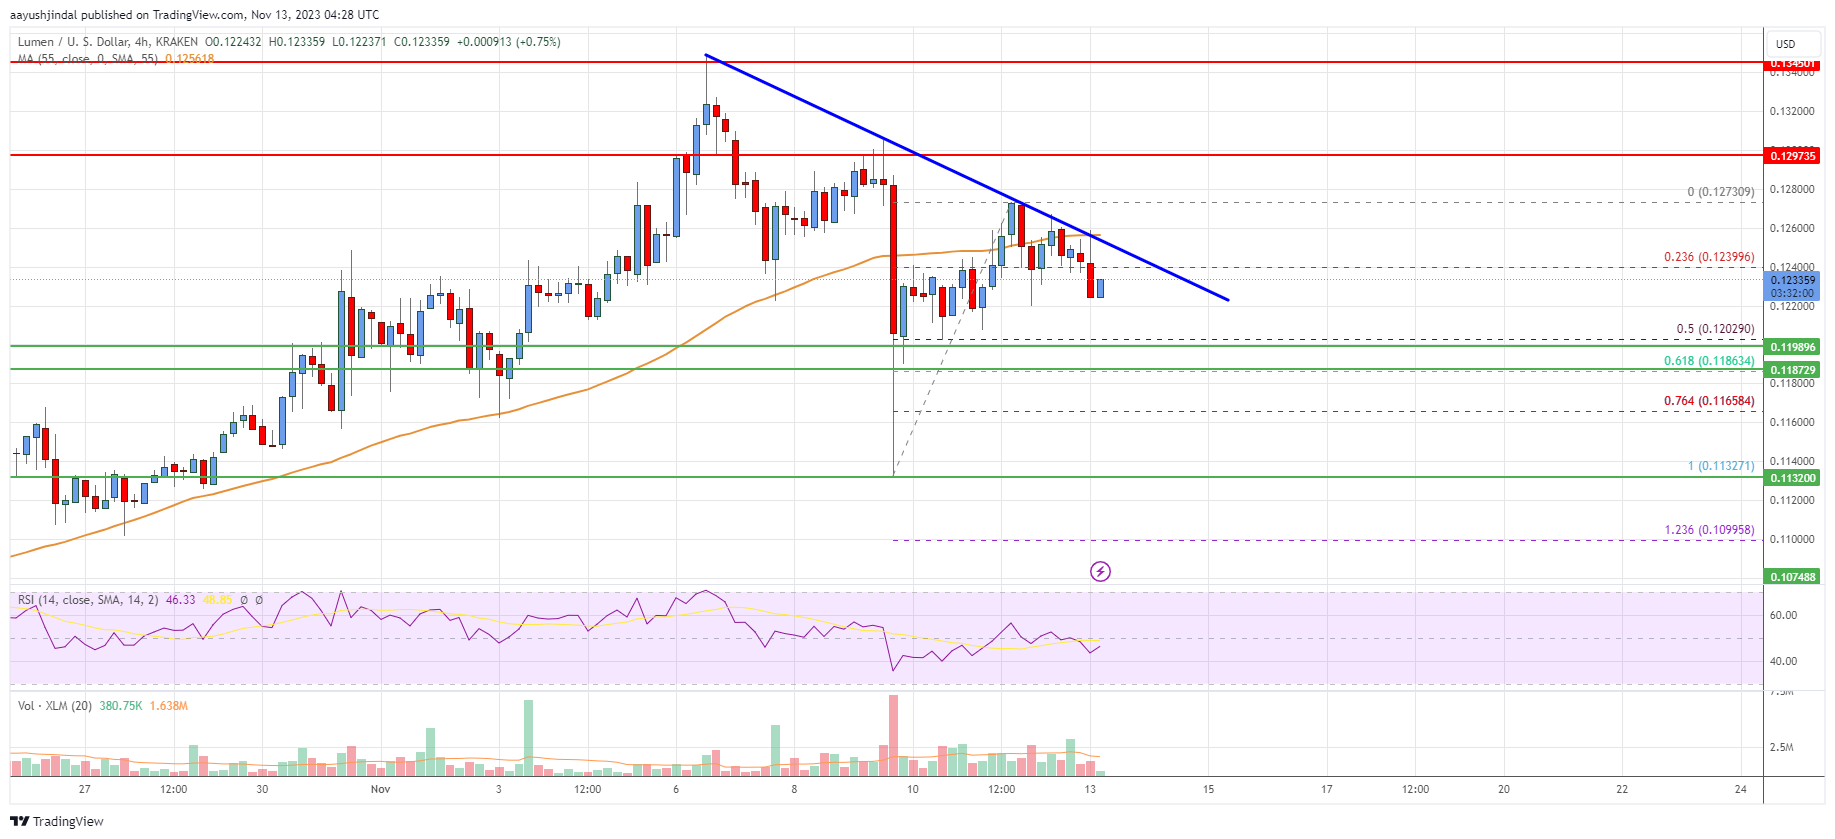 Stellar Lumen (XLM) Price Remains Supported For Fresh Increase Above $0.12